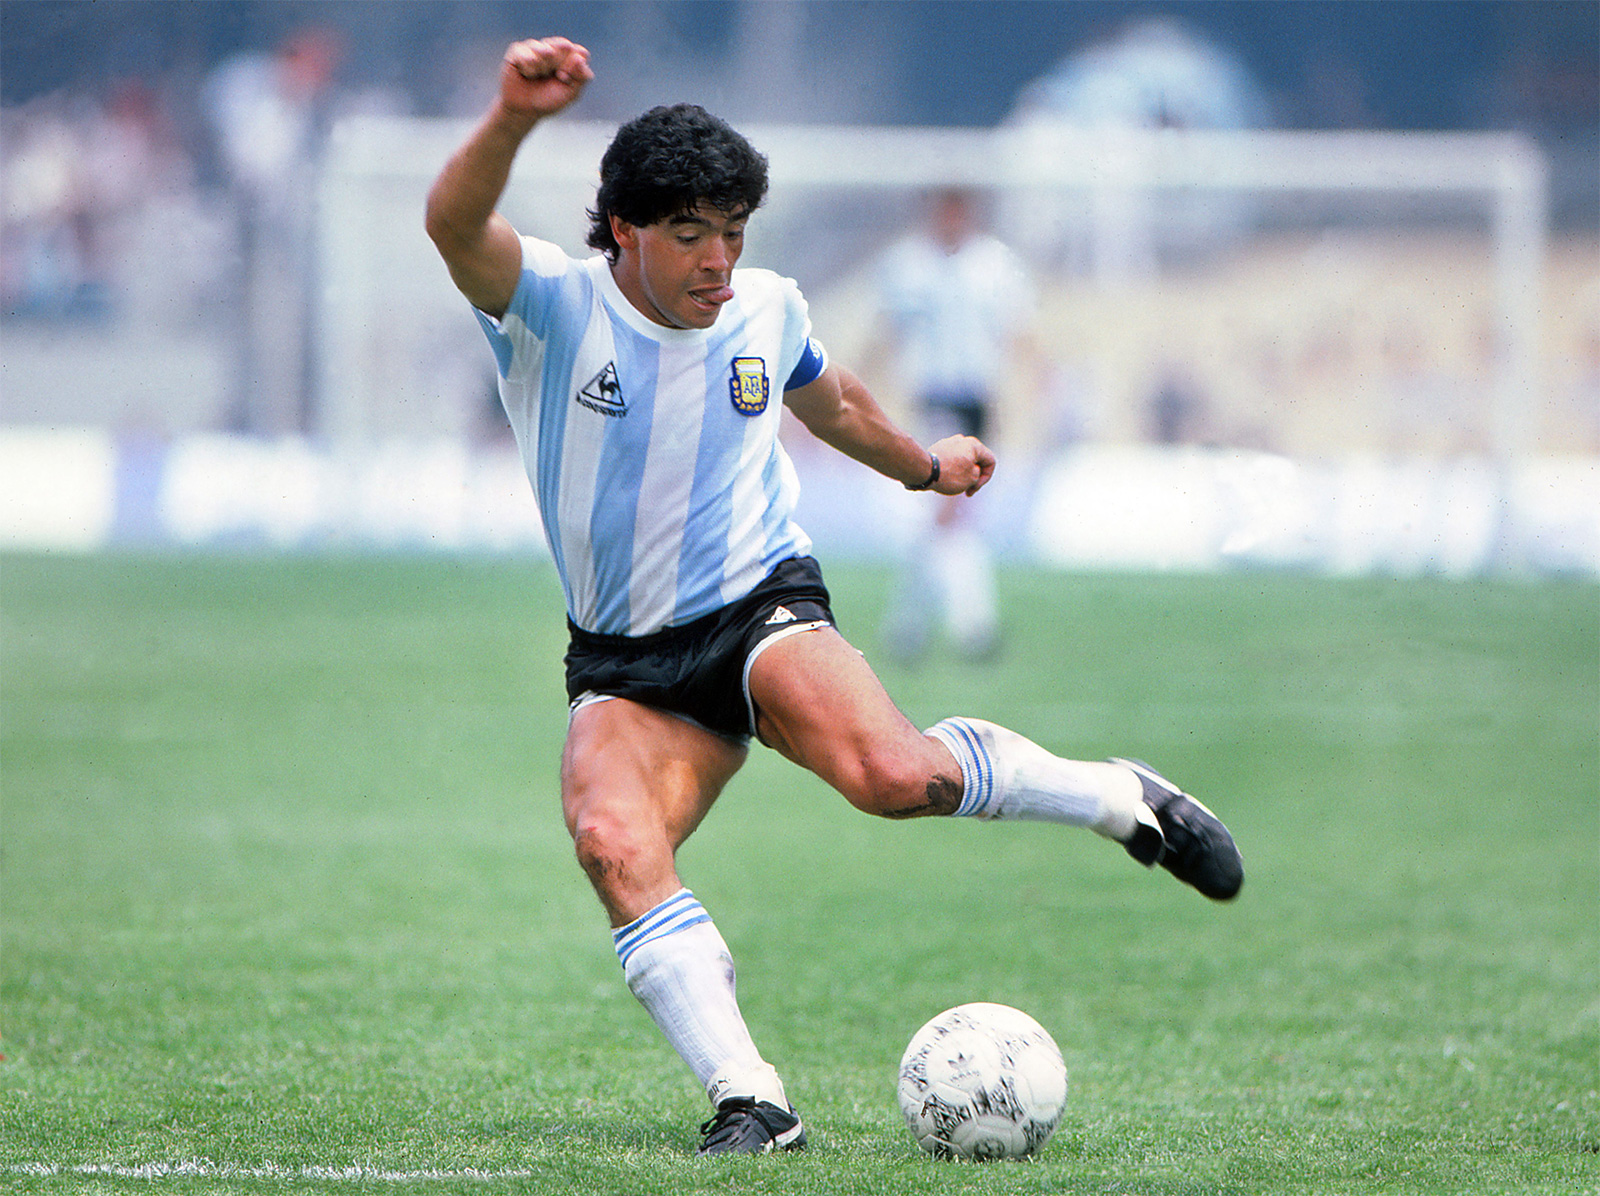 Maradona's Autopsy Turns Out Negative For Banned Drugs or Alcohol